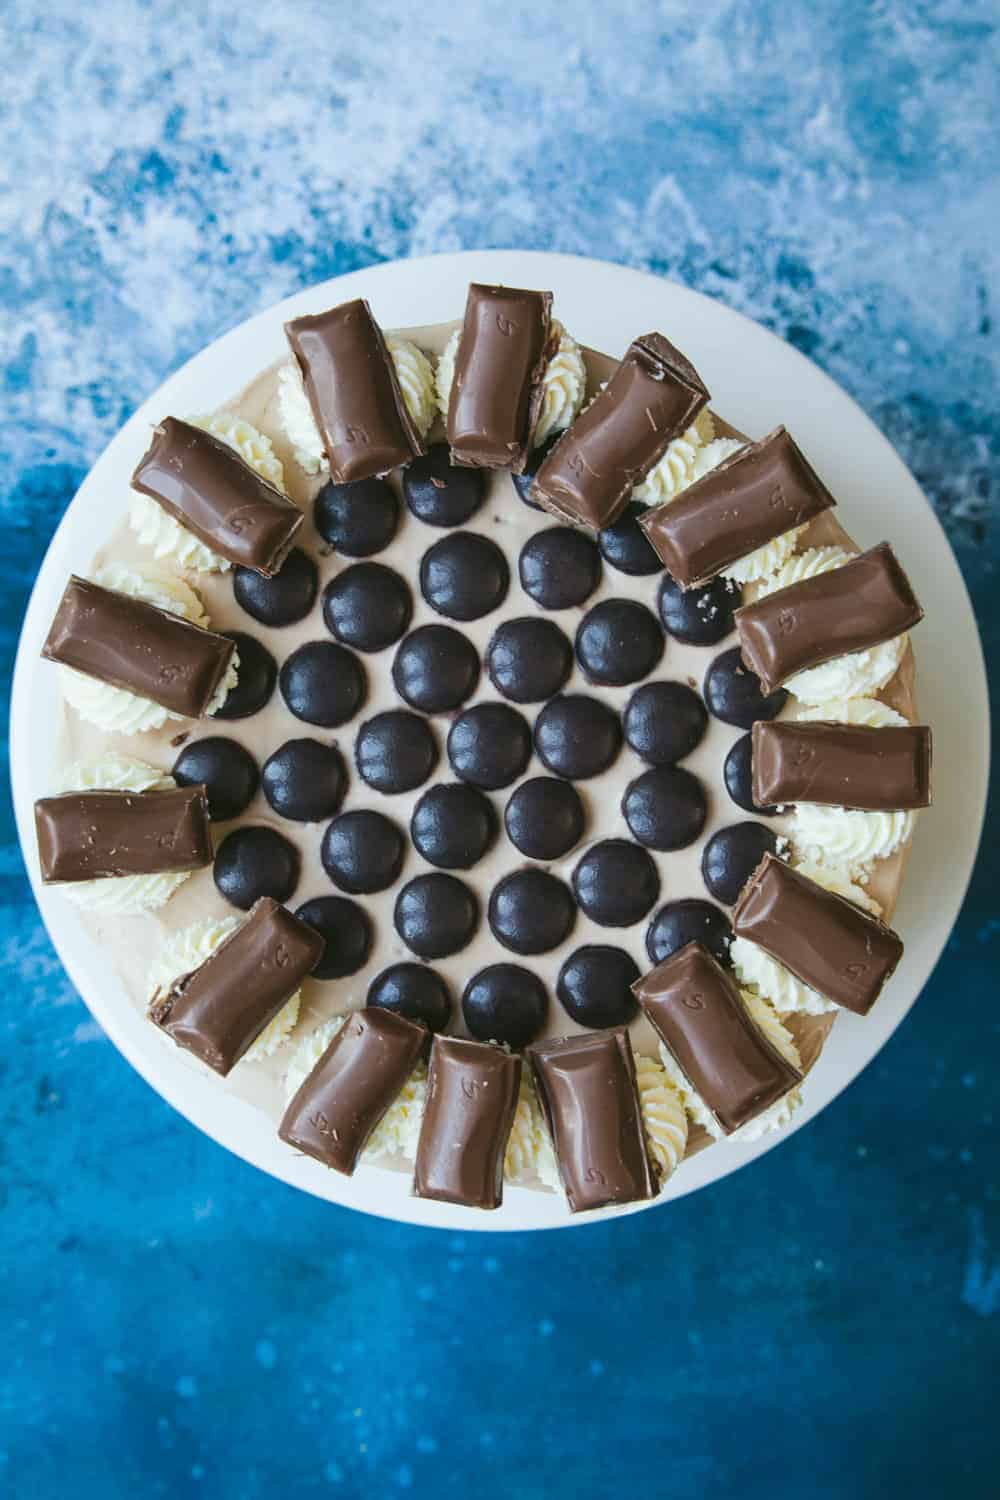 A Galaxy Caramel Cheesecake covered in Minstrels, cream swirls and pieces of Galaxy Caramel